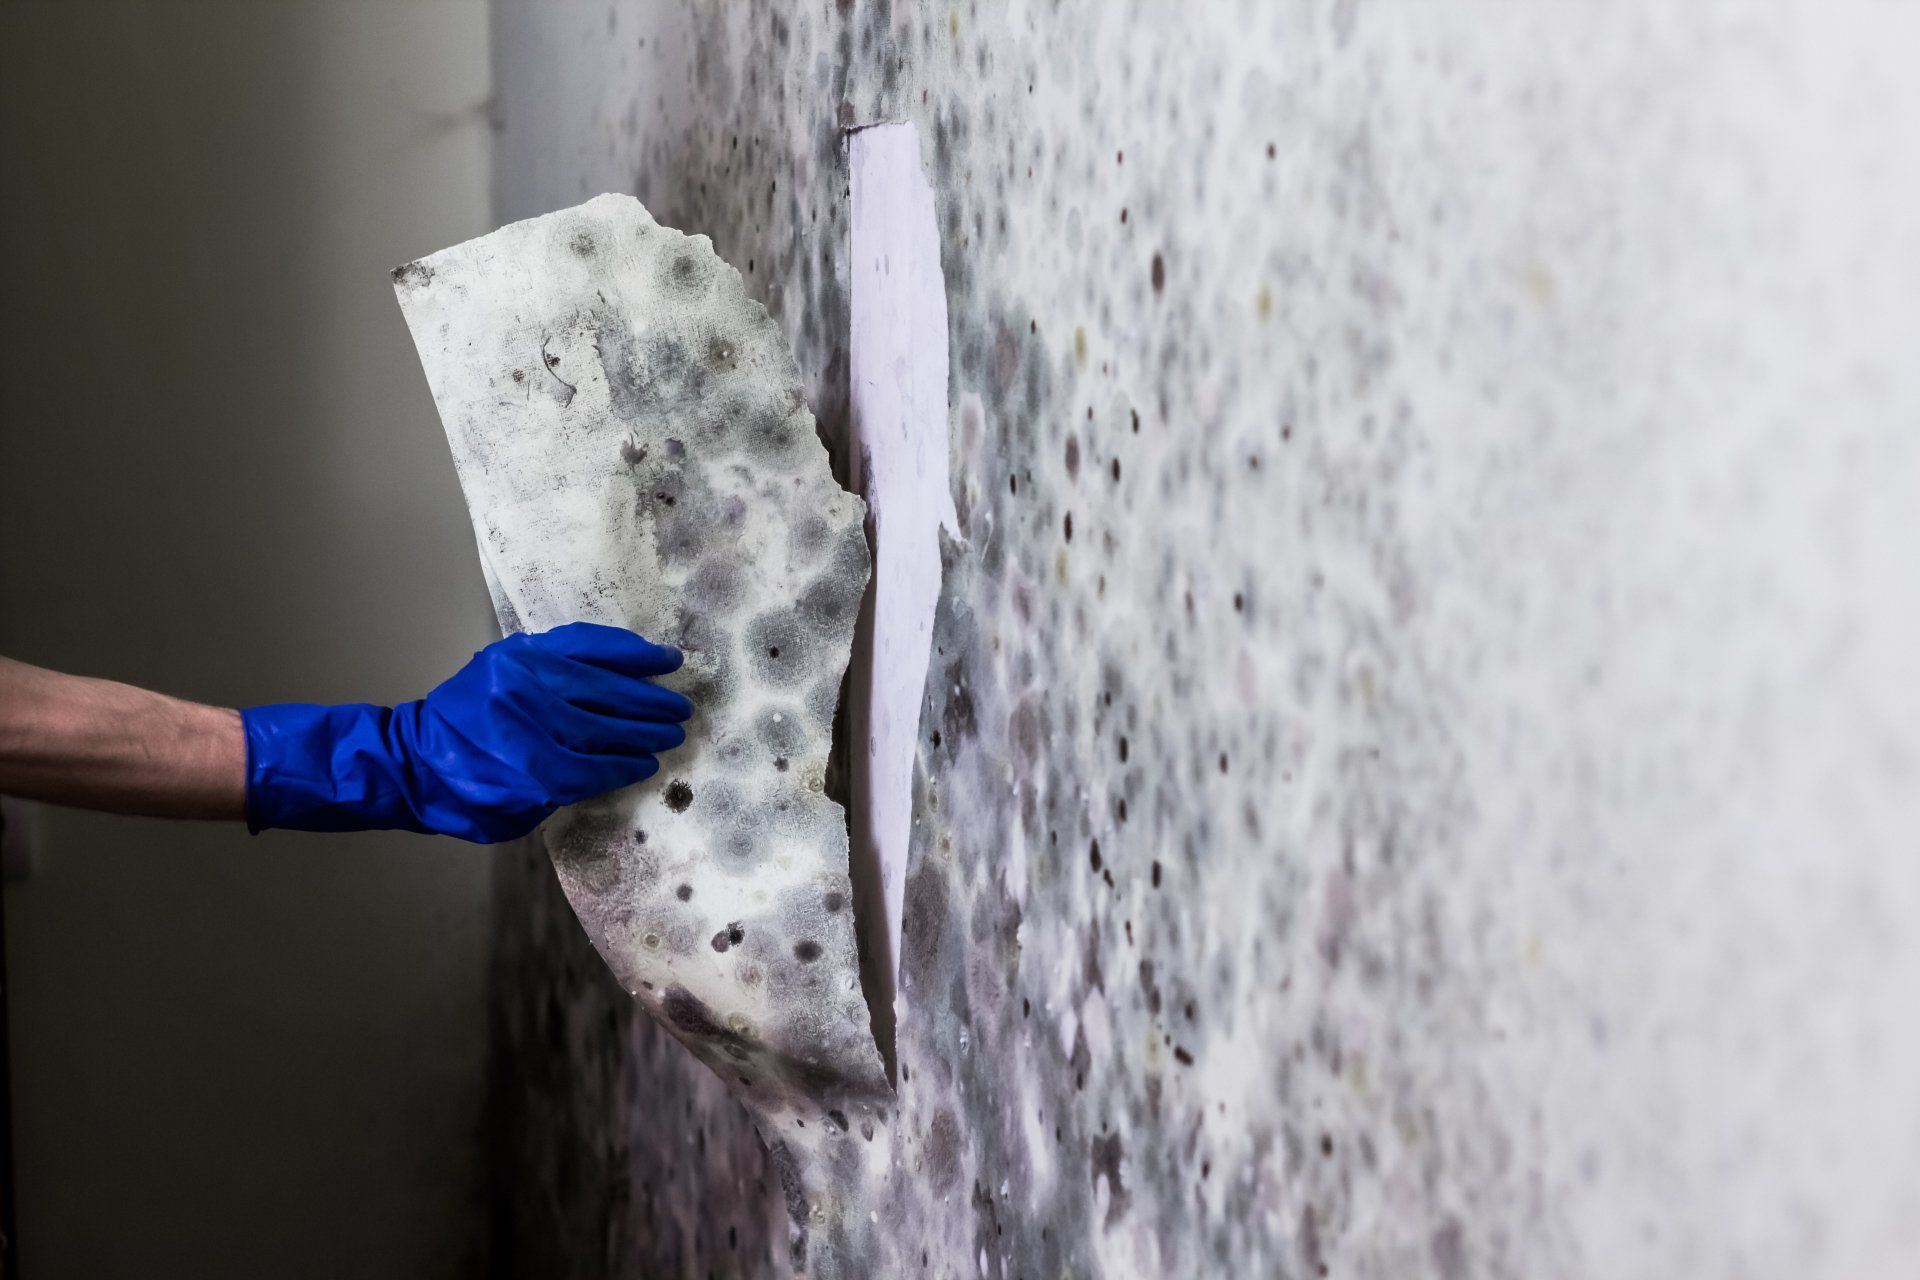 Removing Mold from the wall in the house using Blue gloves